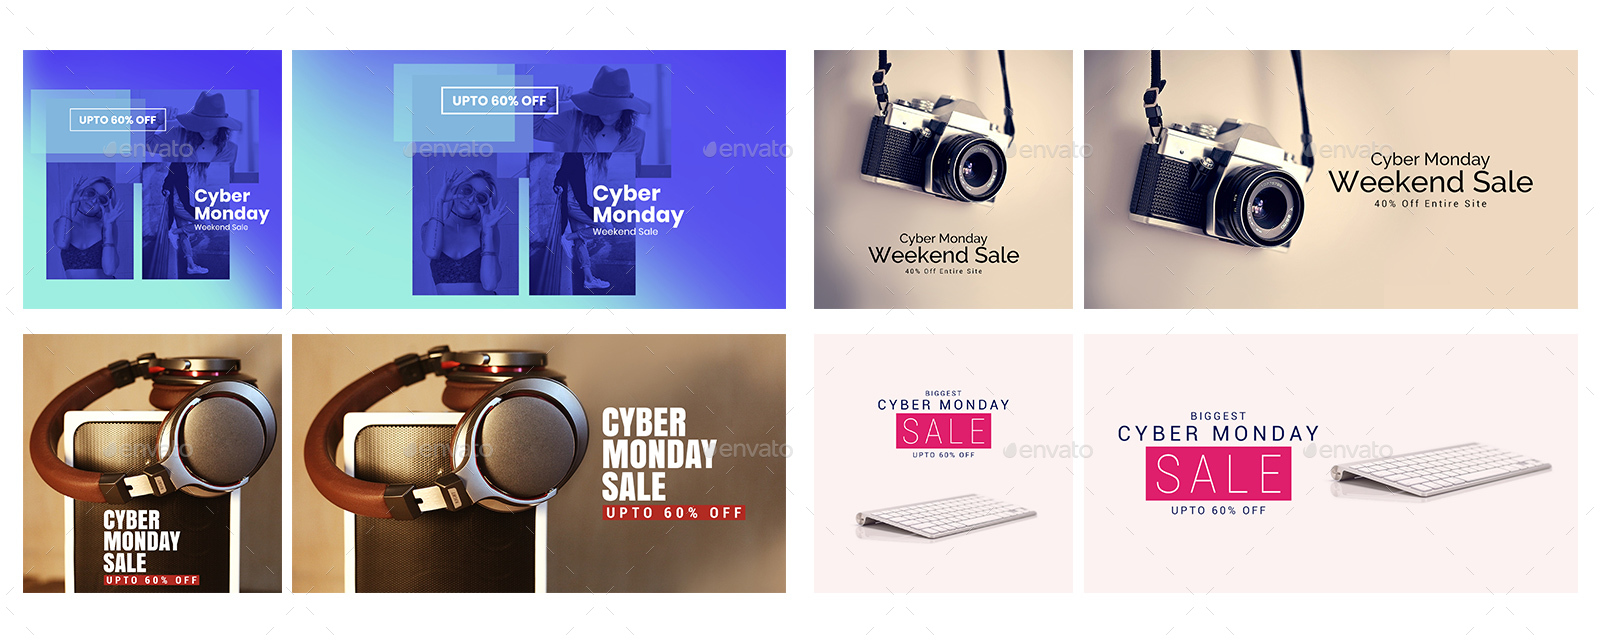 Cyber Monday Sale Facebook And Instagram Newsfeed Banners - 10 Designs